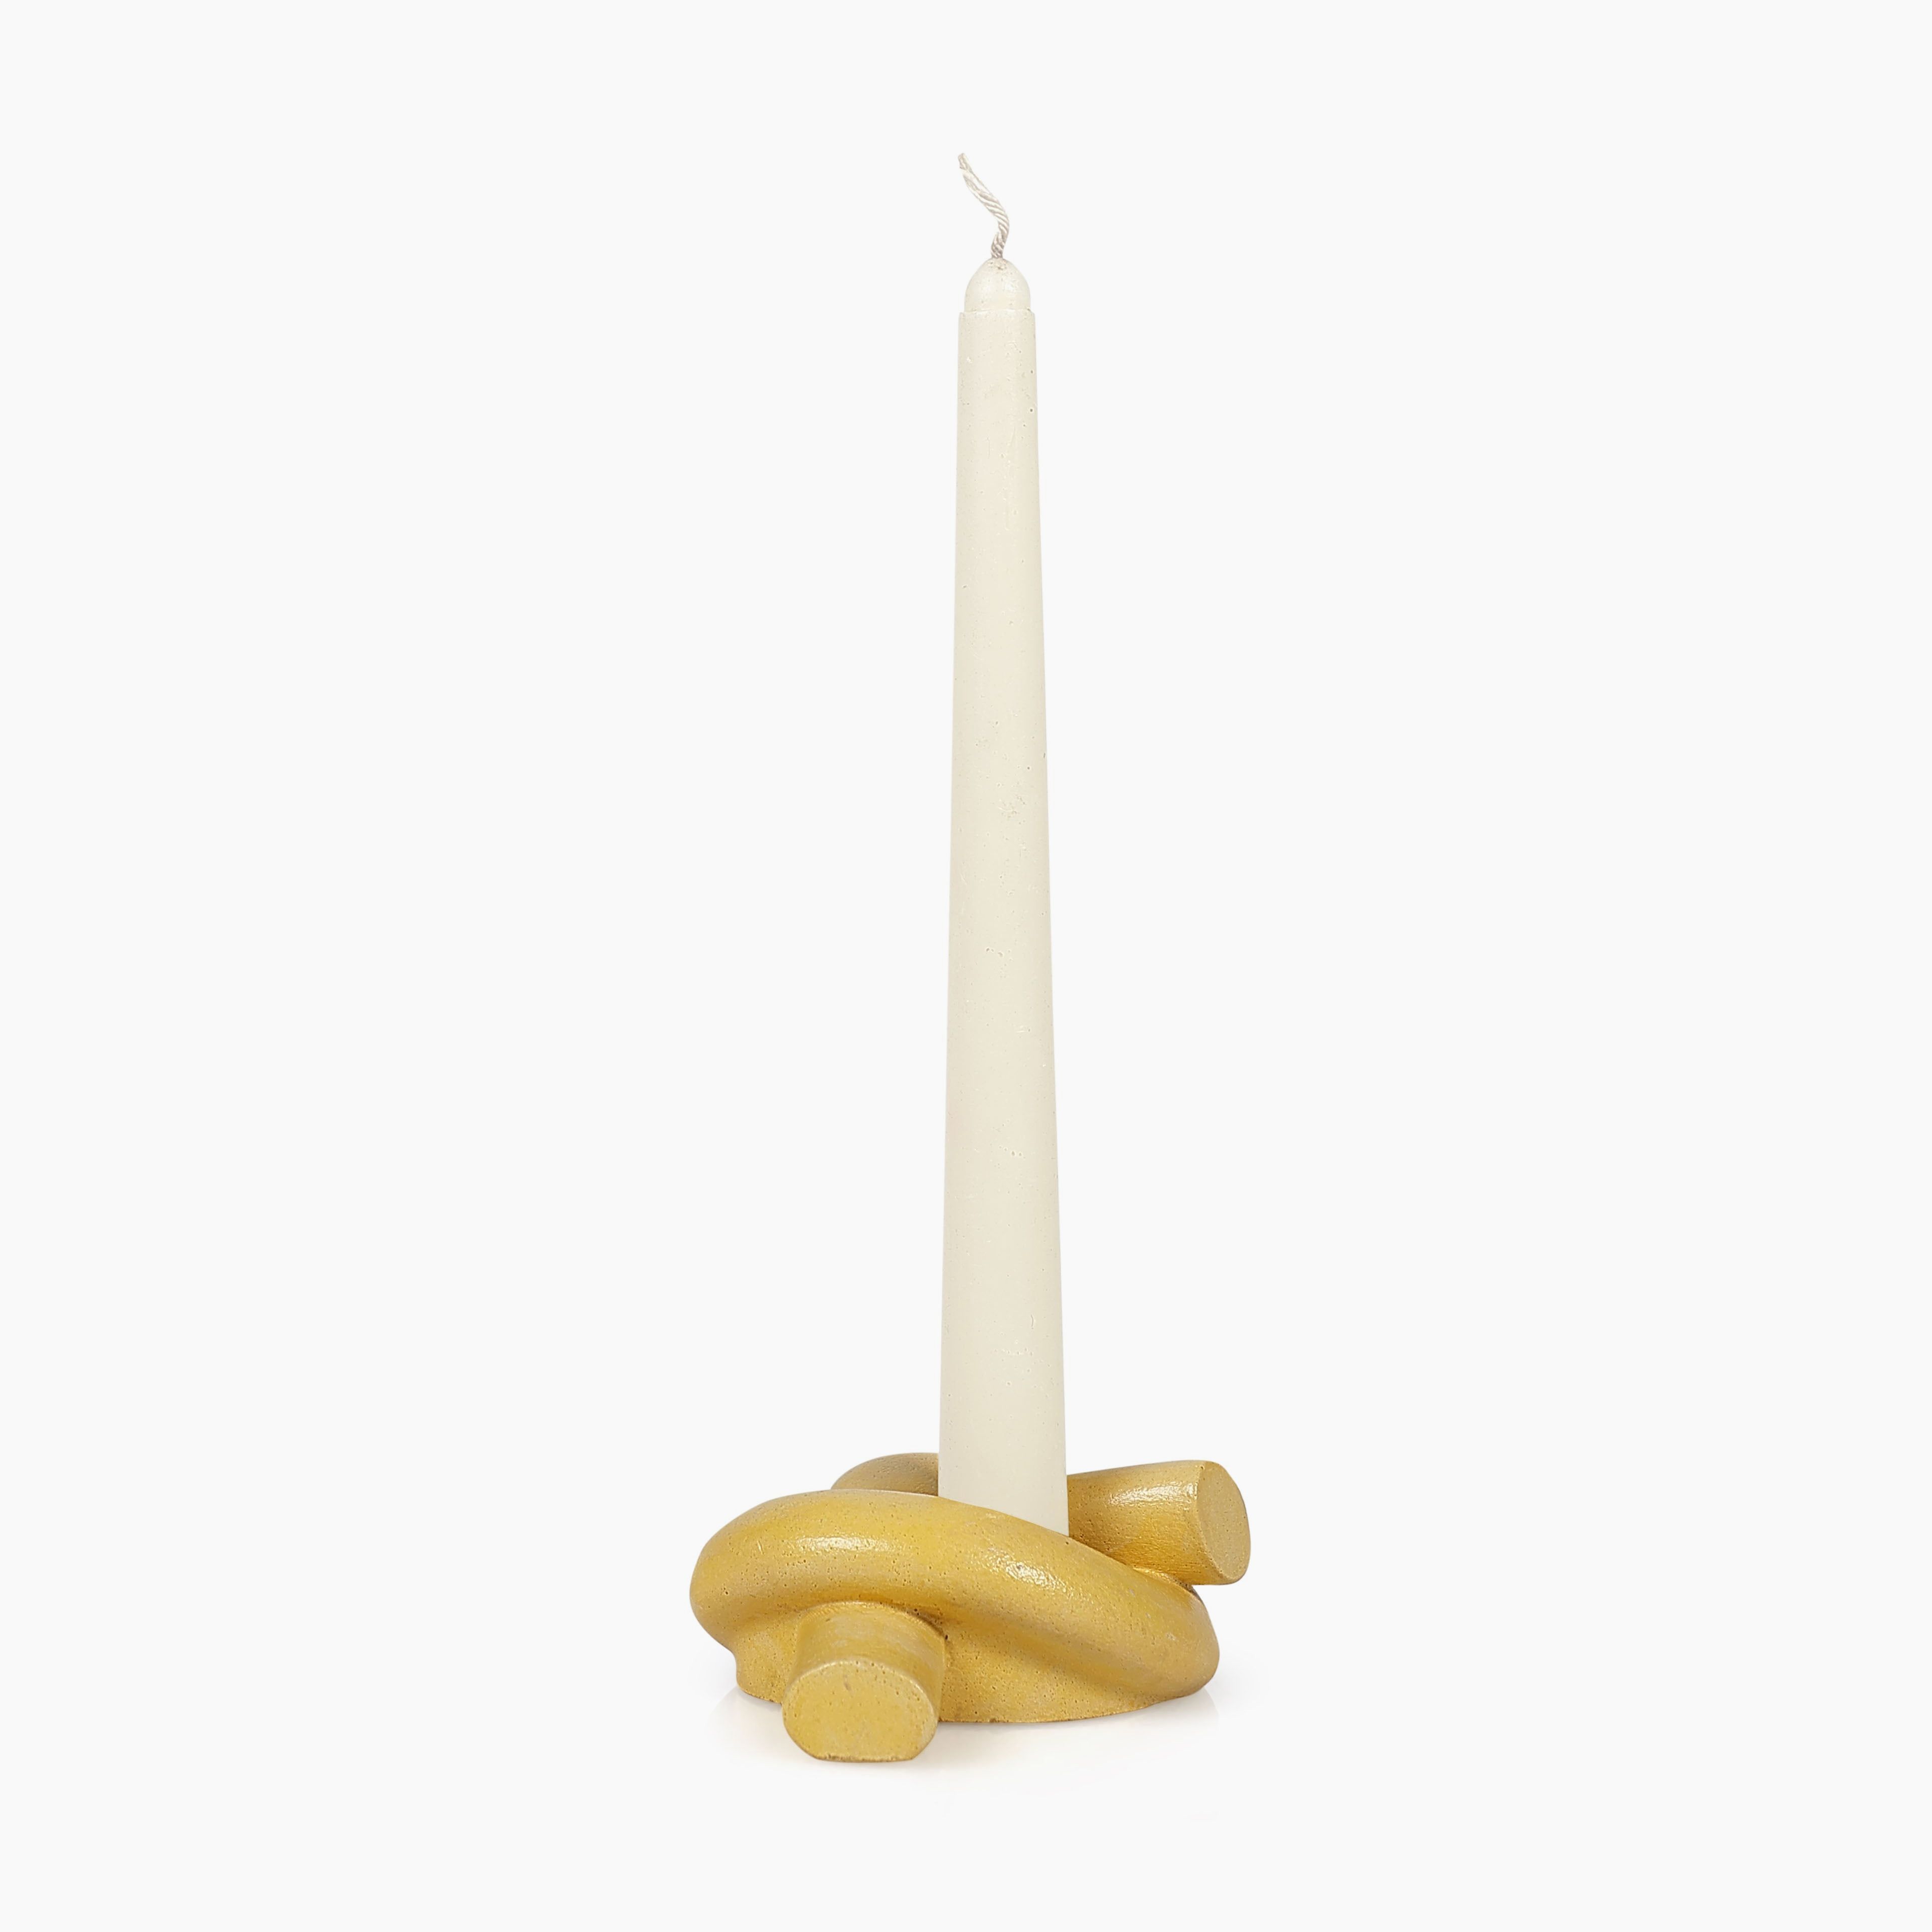 Nordic Style Knot Concrete Candle Holder - Mustard Yellow 3.2x4.5 Inch